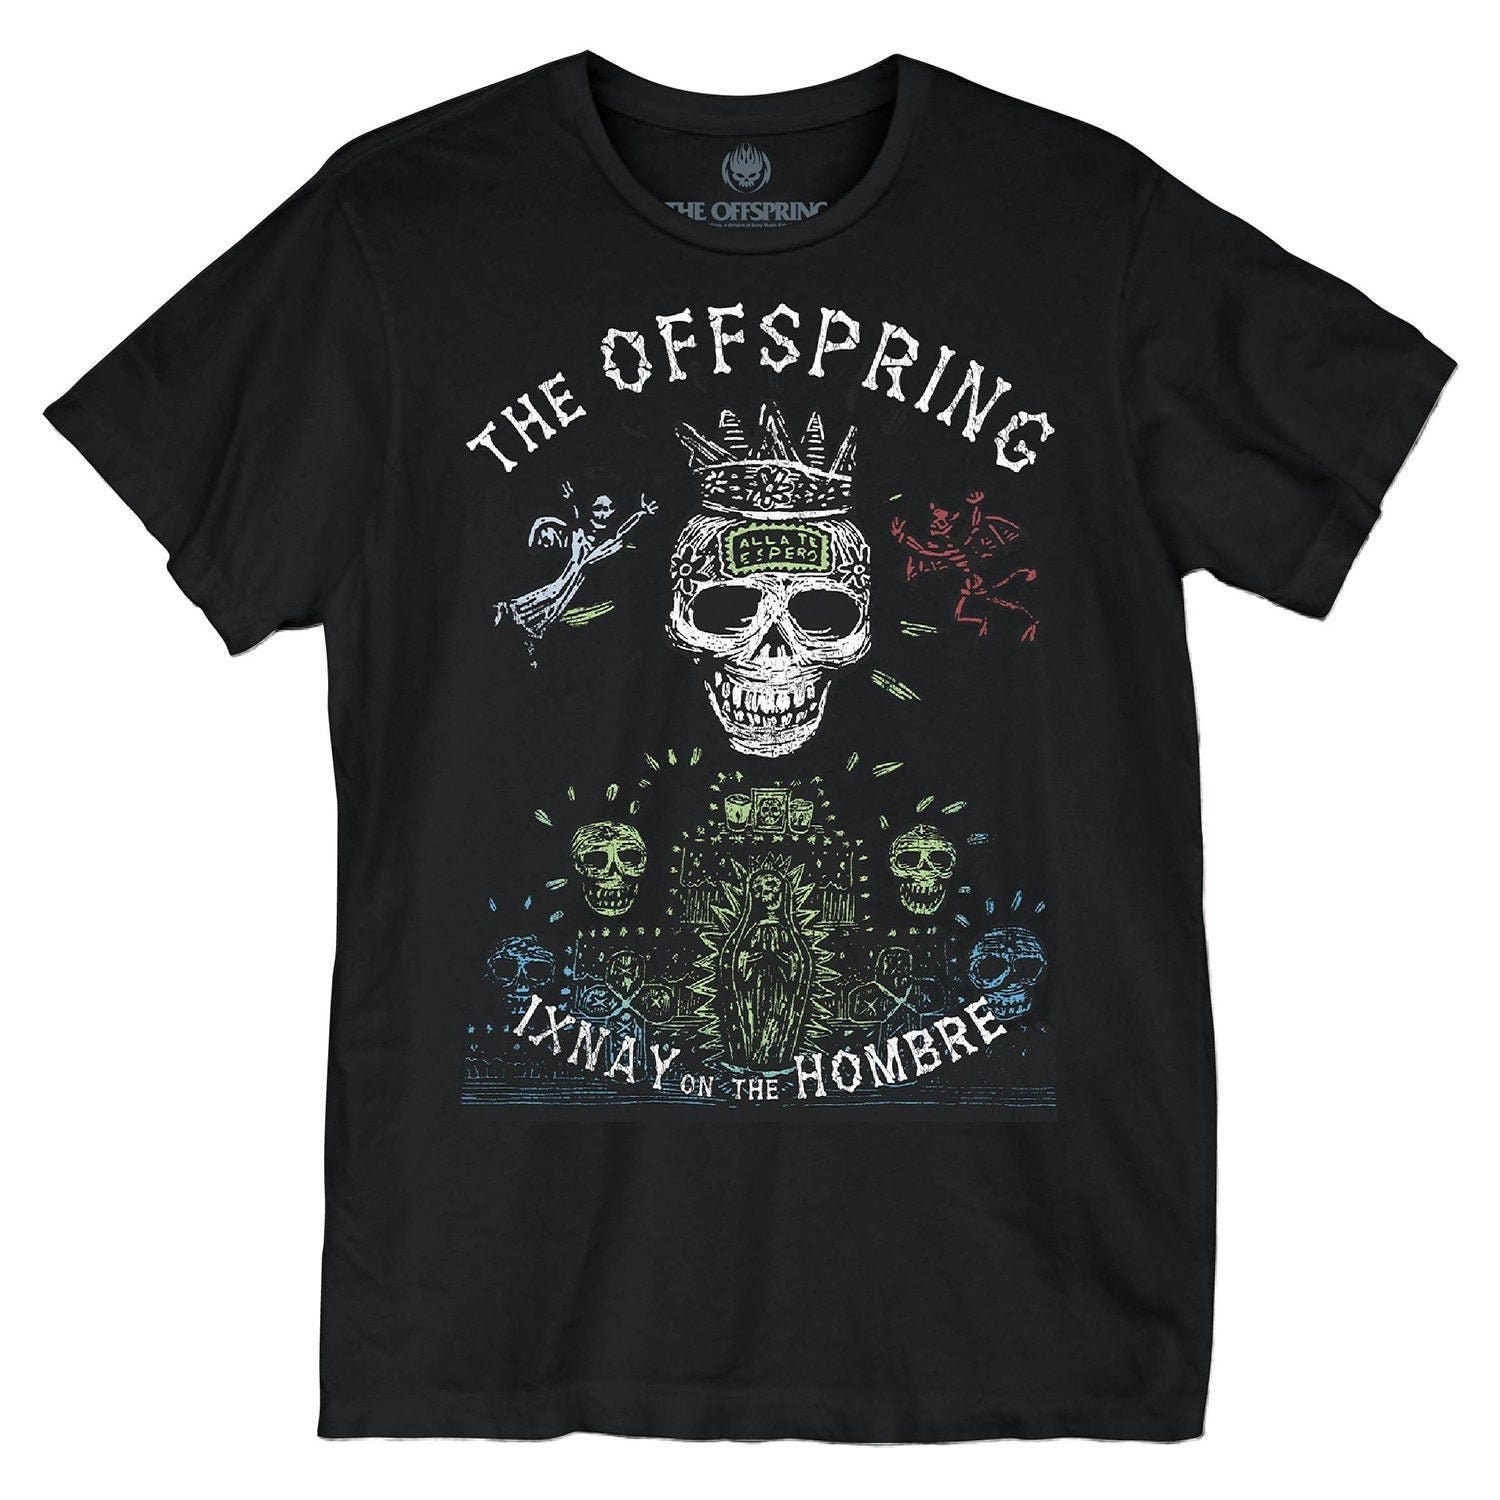 Discover The Offspring IXNAY On The Hombre Shirt, American Rock Band The Offspring 1980s Outfit